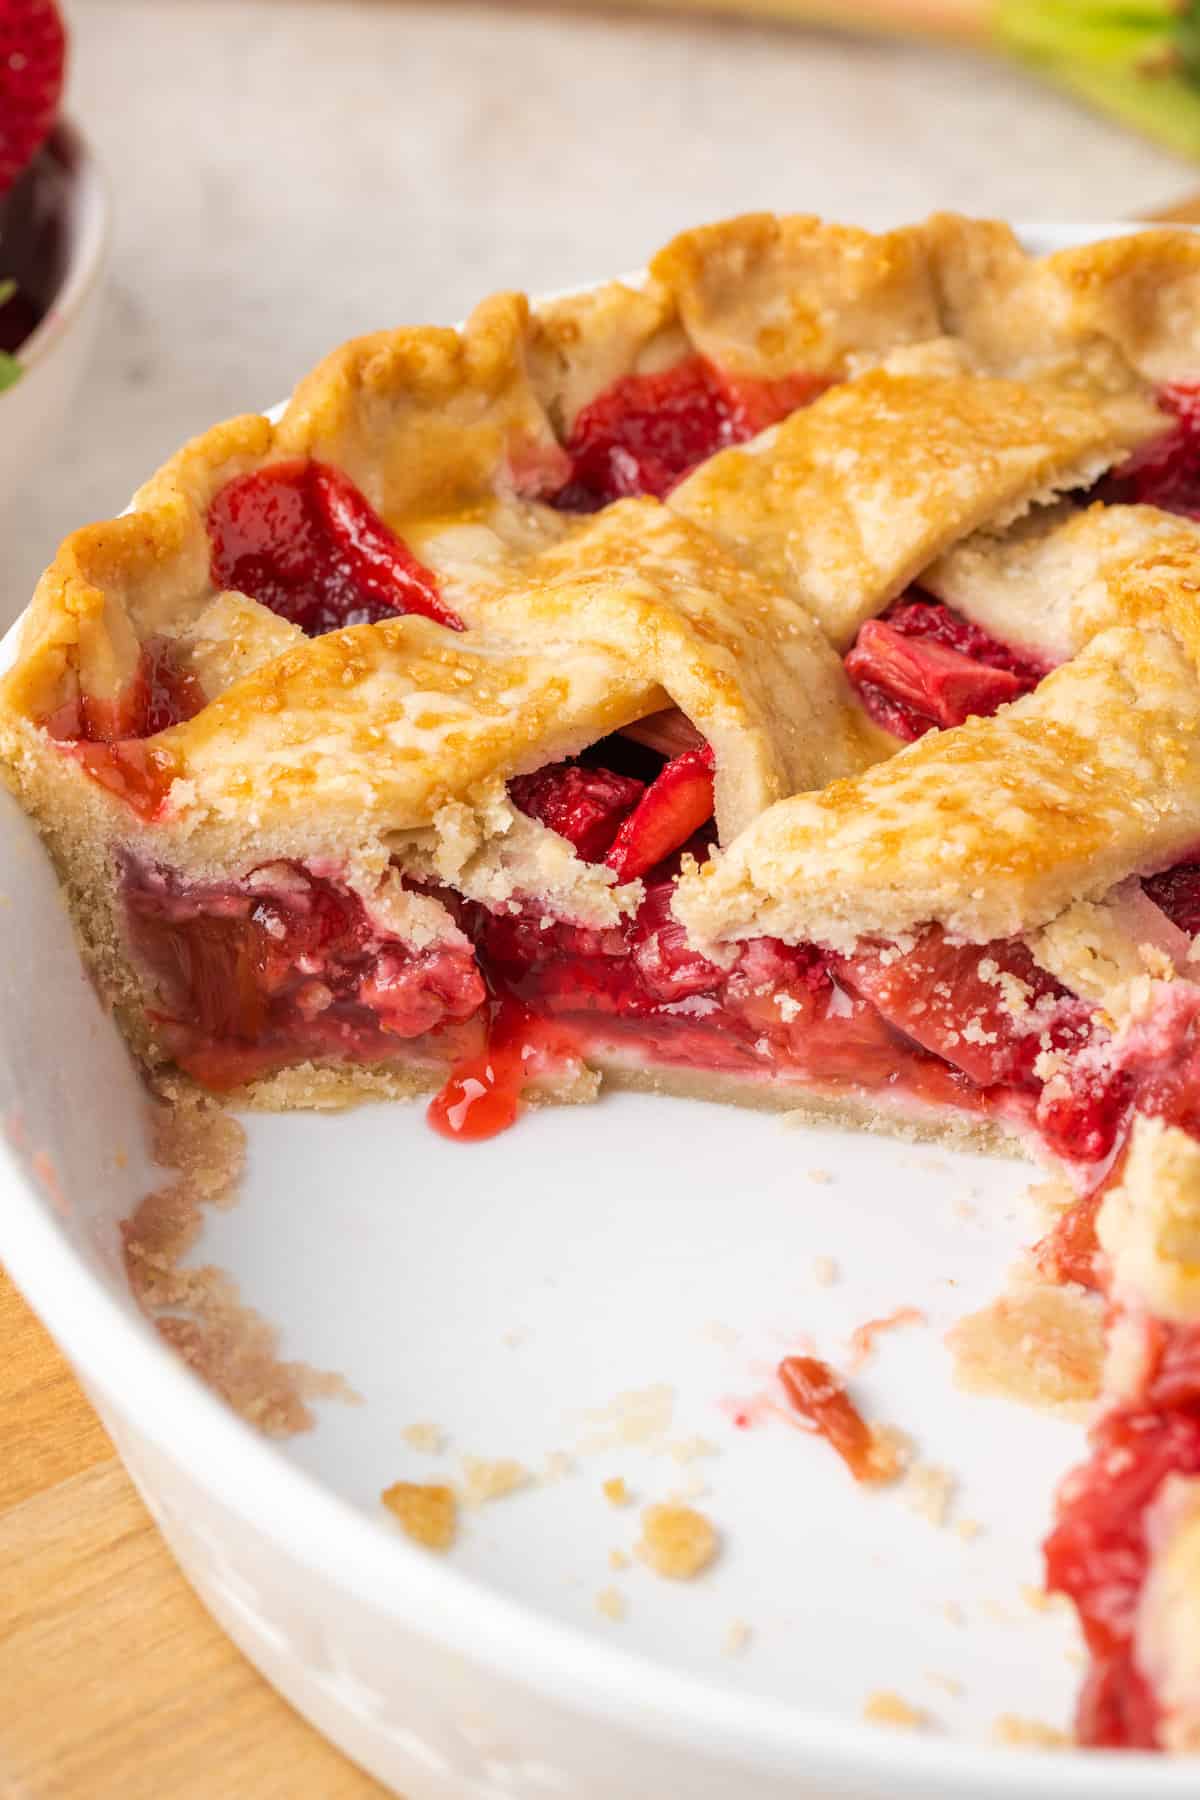 A strawberry rhubarb pie with a few slices removed.